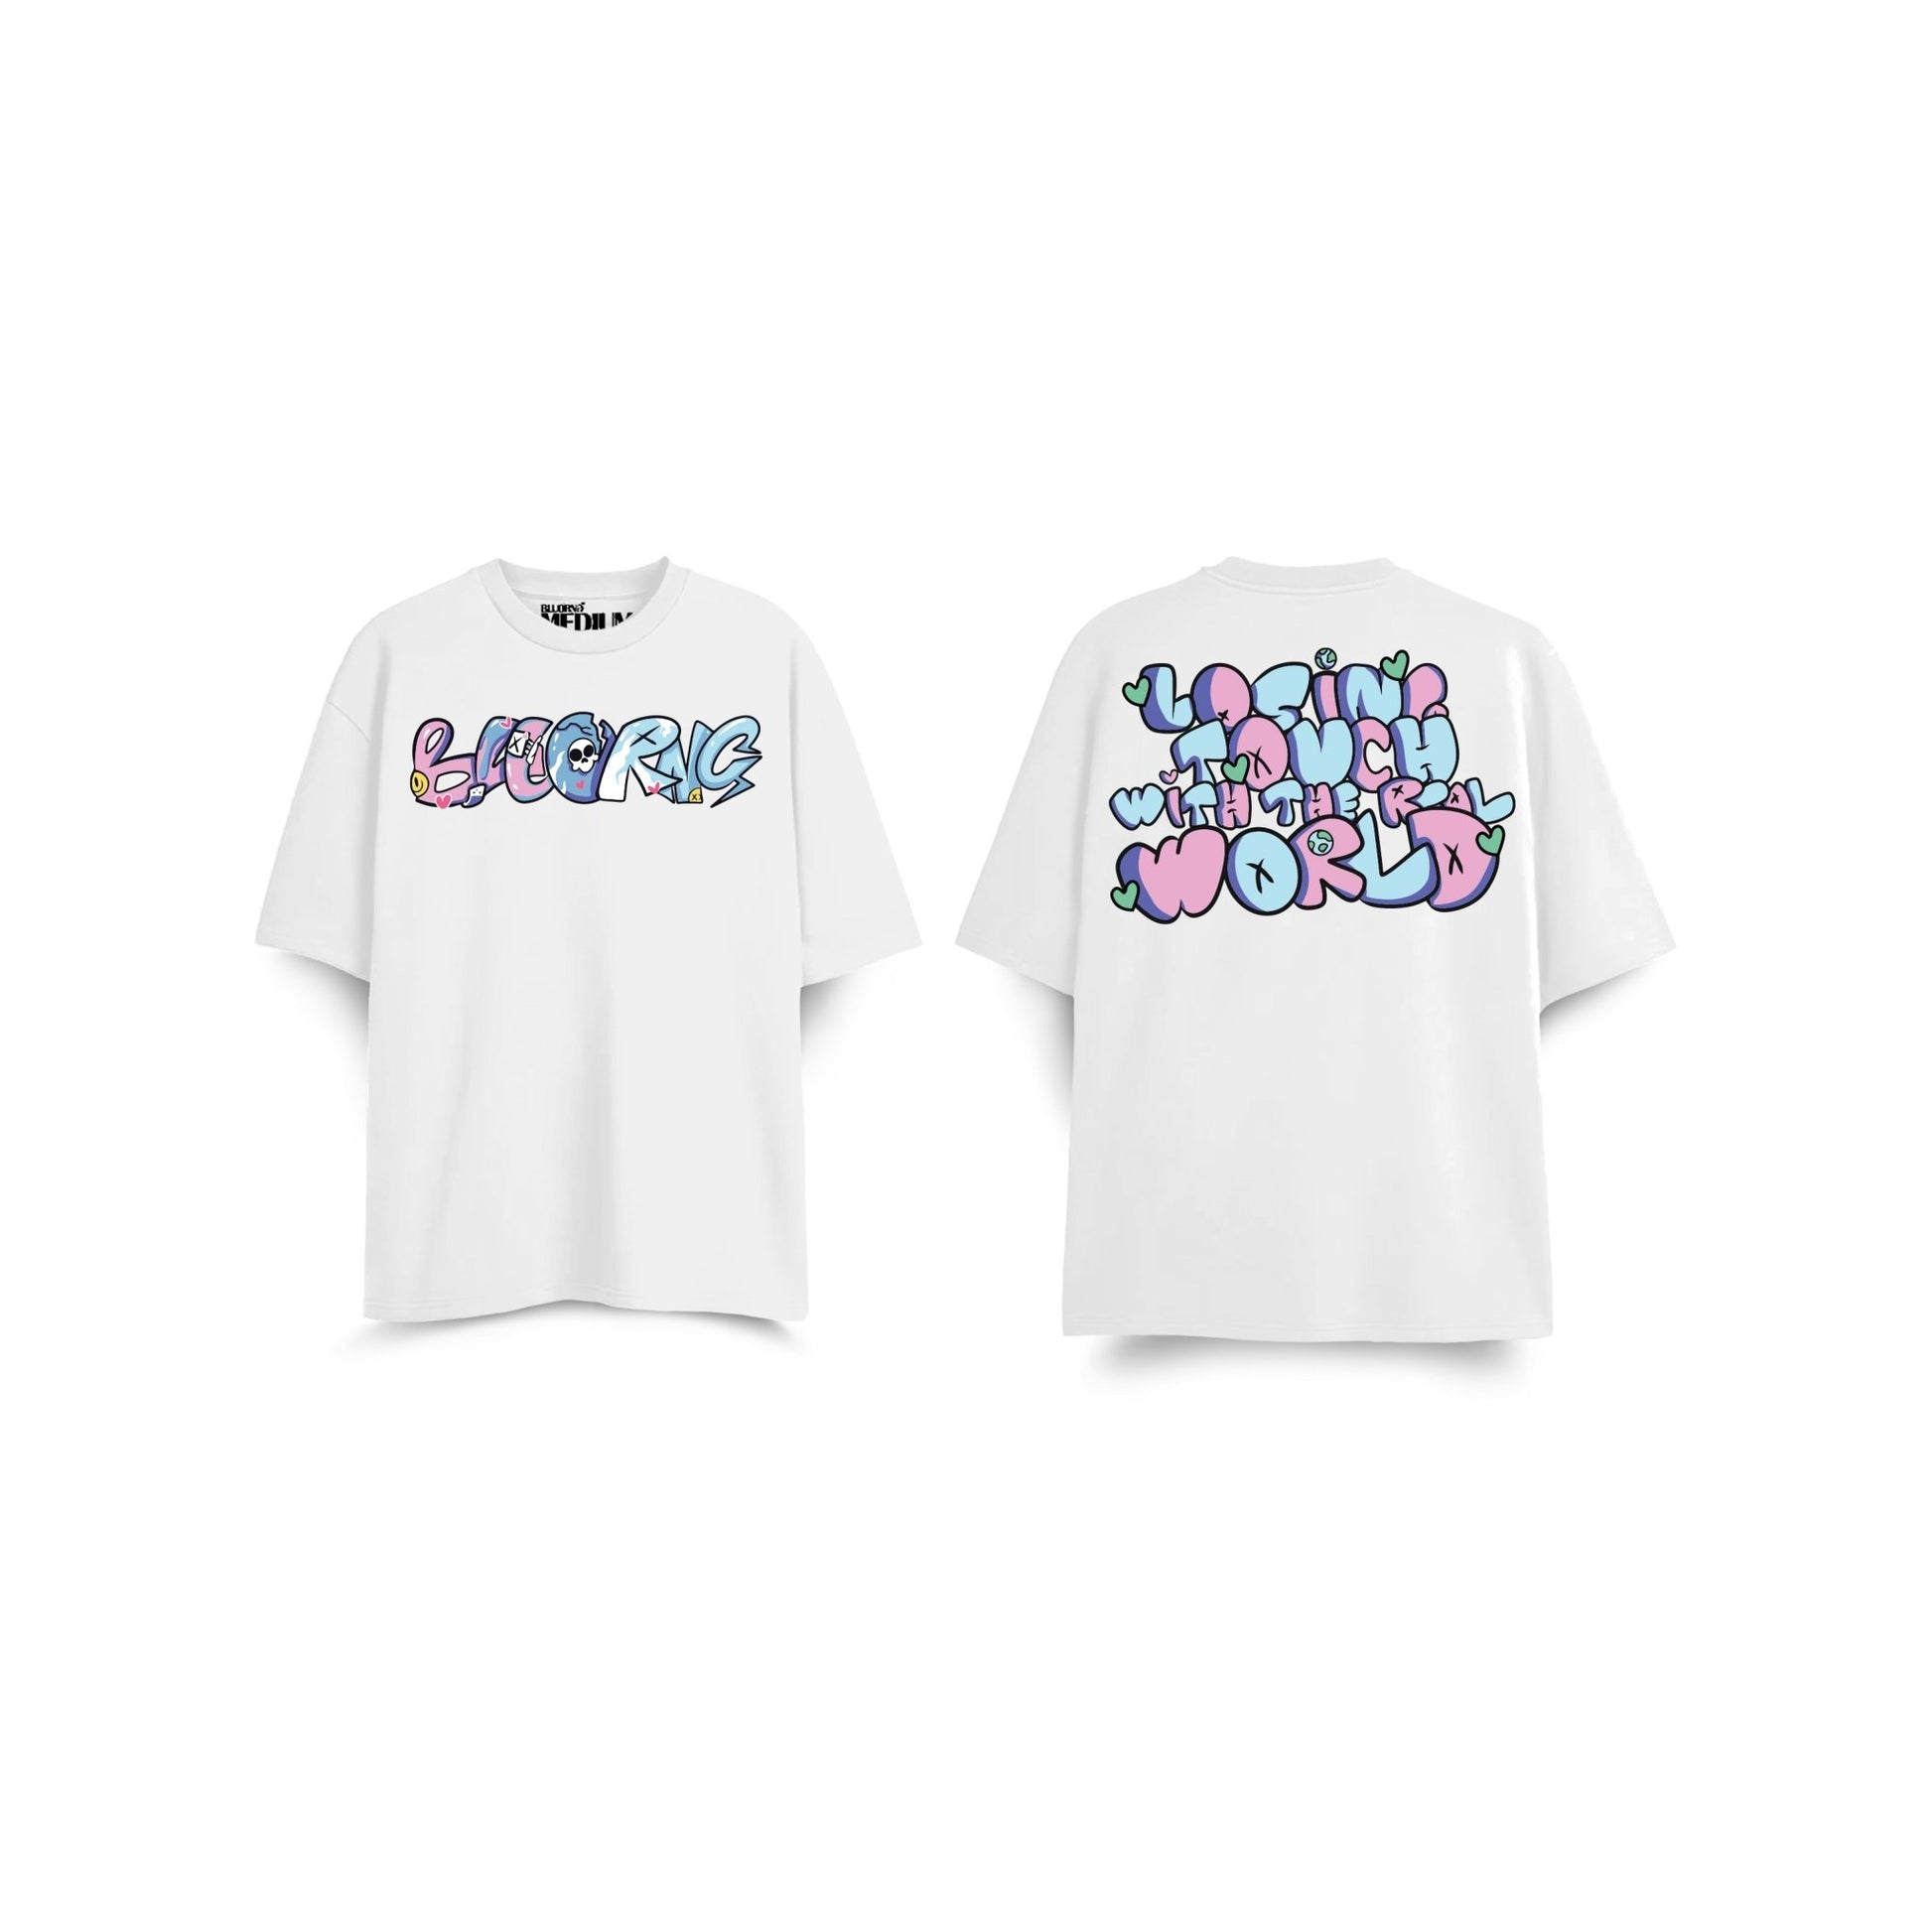 UNREAL tee white - Bluorng